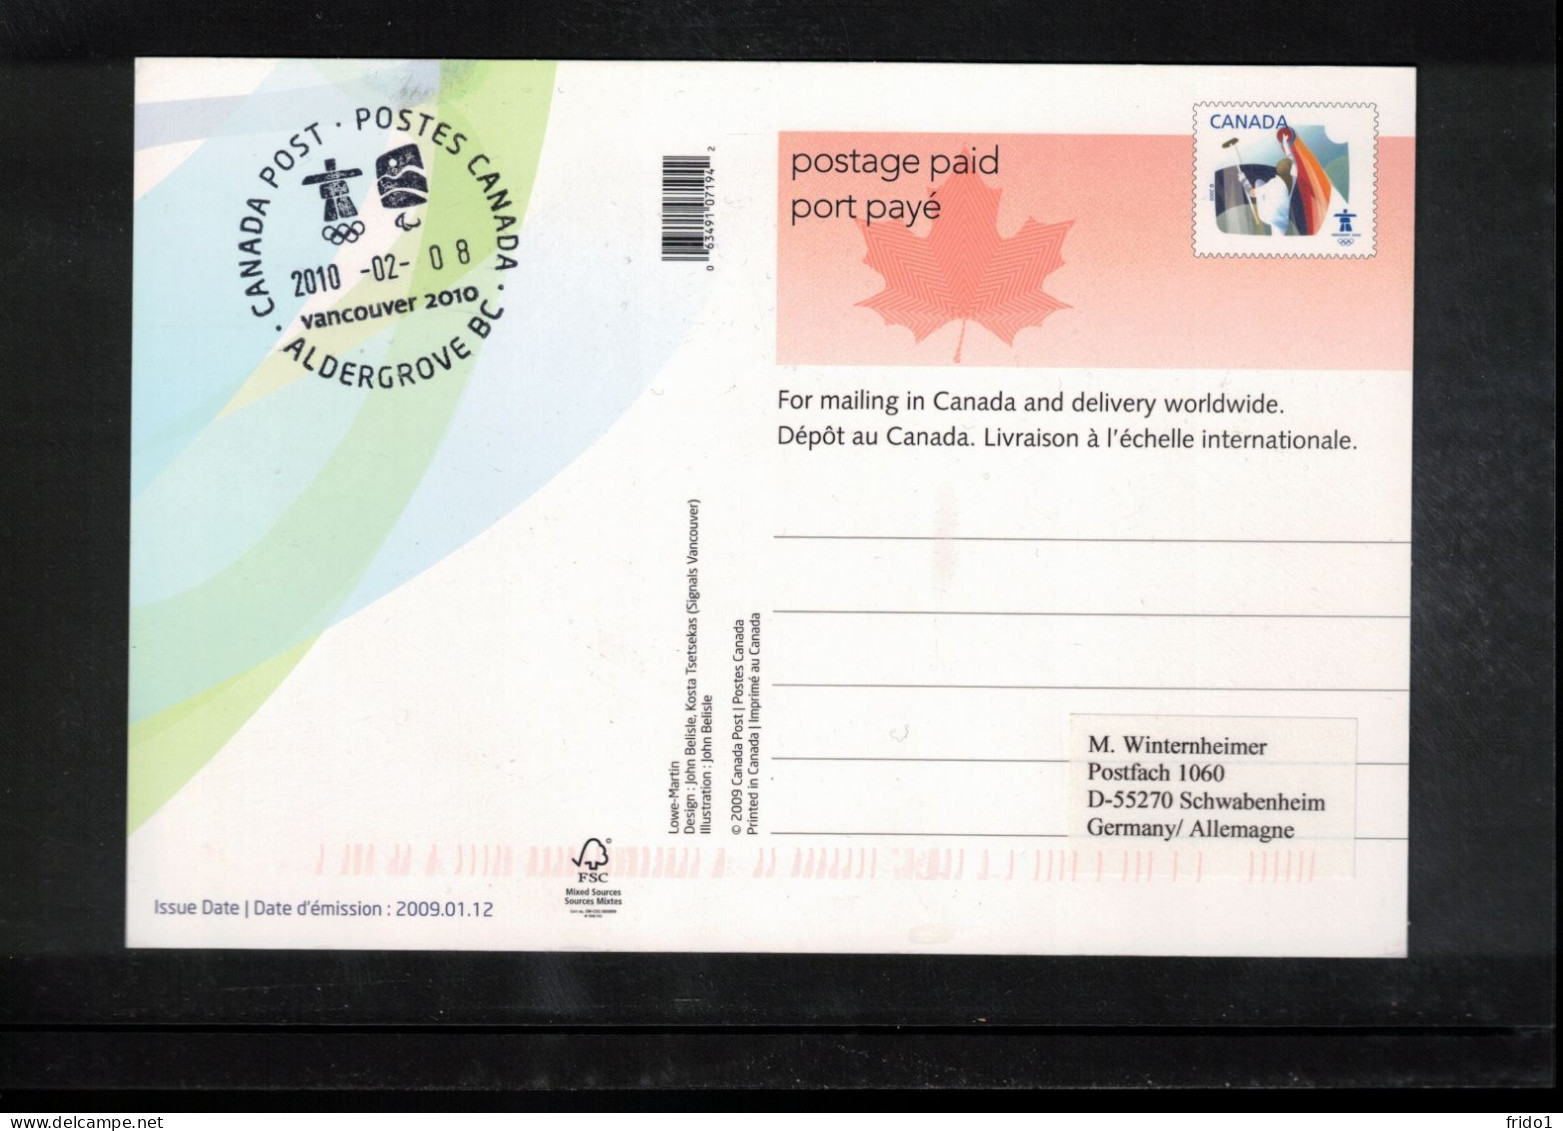 Canada 2010 Olympic Games Vancouver - ALDERGROVE BC Postmark Interesting Postcard - Hiver 2010: Vancouver